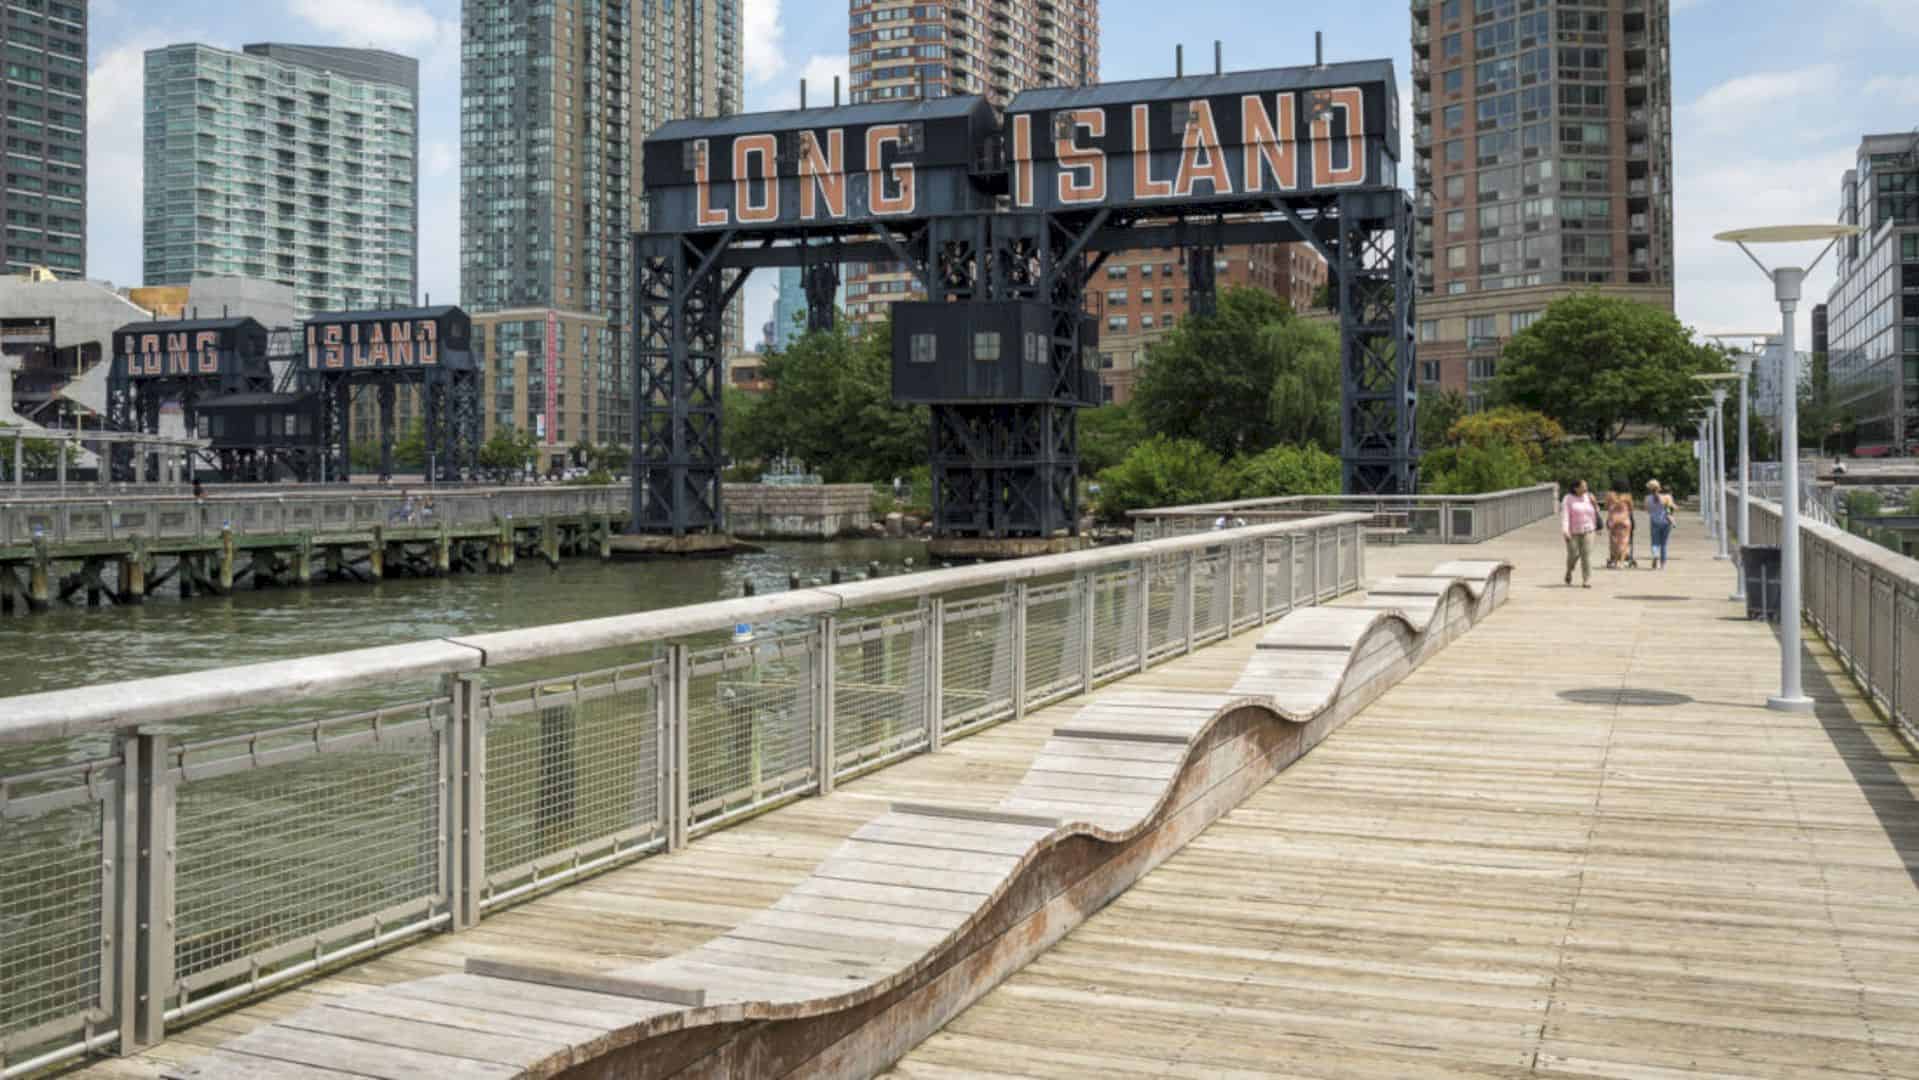 Gantry Plaza State Park A Place Celebrating Its Past Future Skyline Views And The River 5